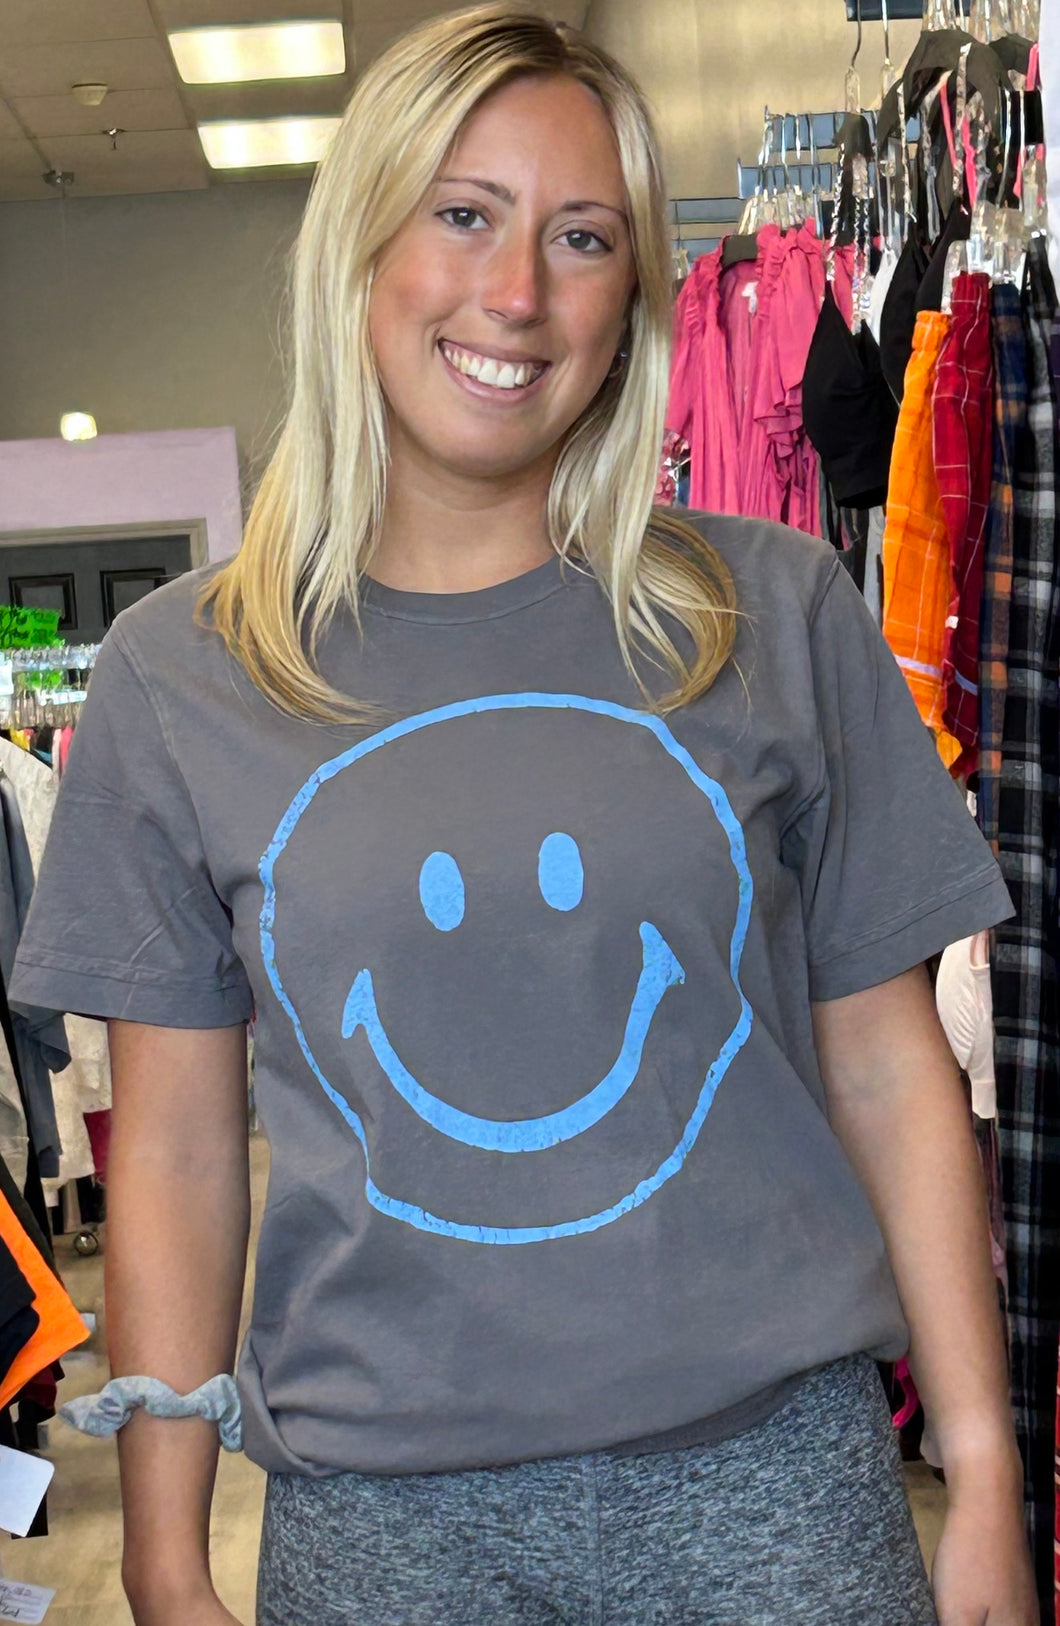 Grey tee with blue smiley face